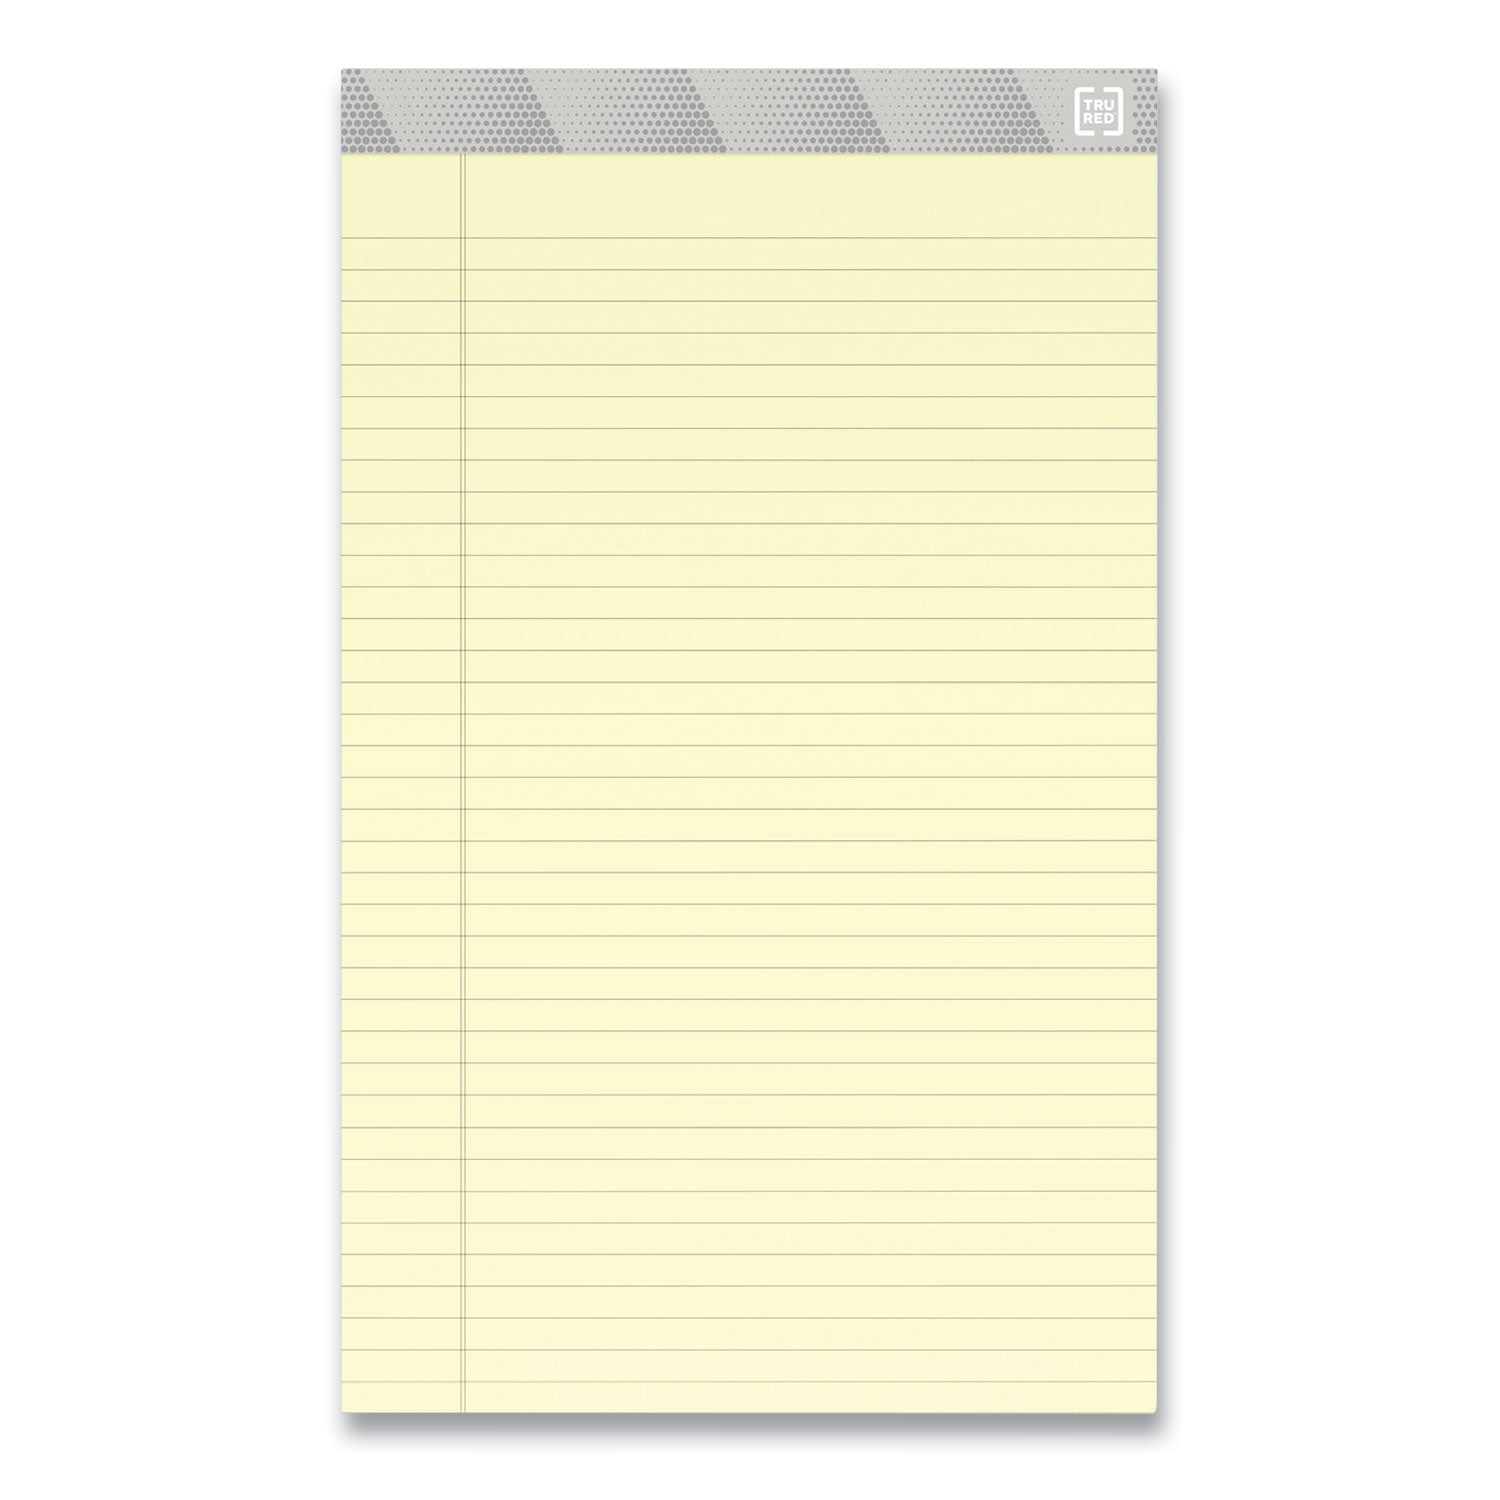 notepads-wide-legal-rule-50-canary-yellow-85-x-14-sheets-12-pack_tud24419918 - 2